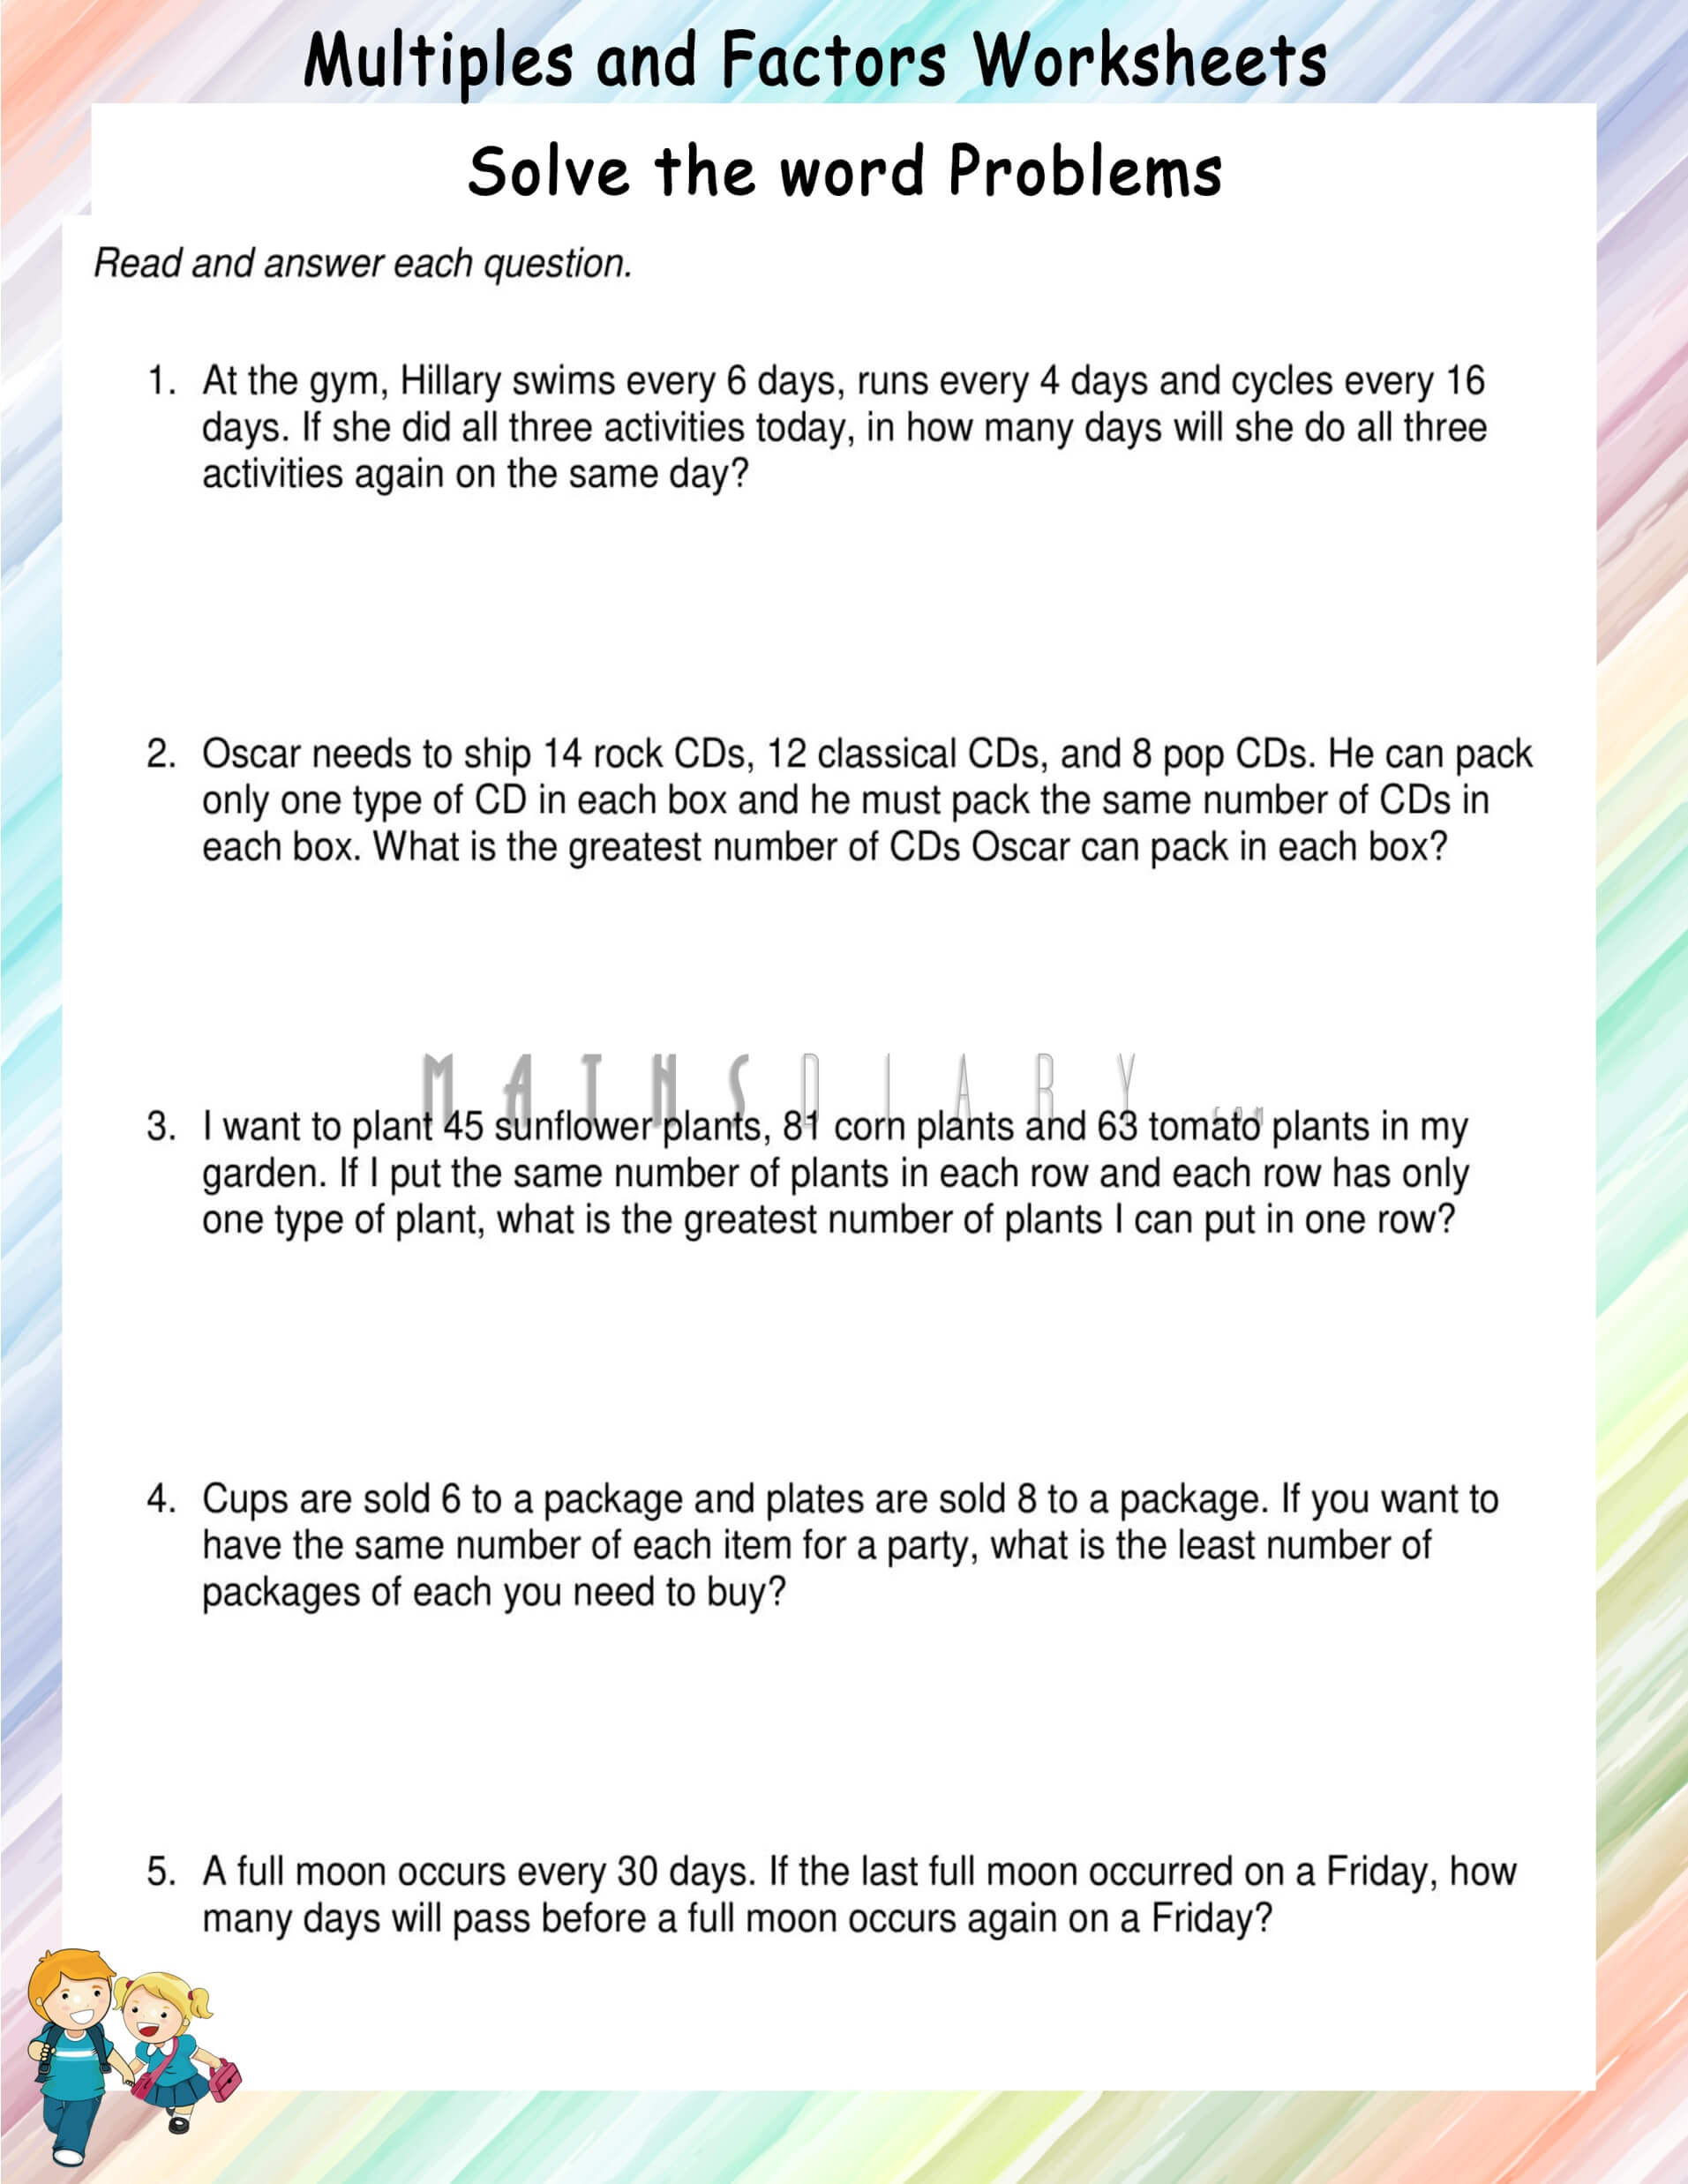 word-problems-multiples-and-factors-worksheets-math-worksheets-mathsdiary